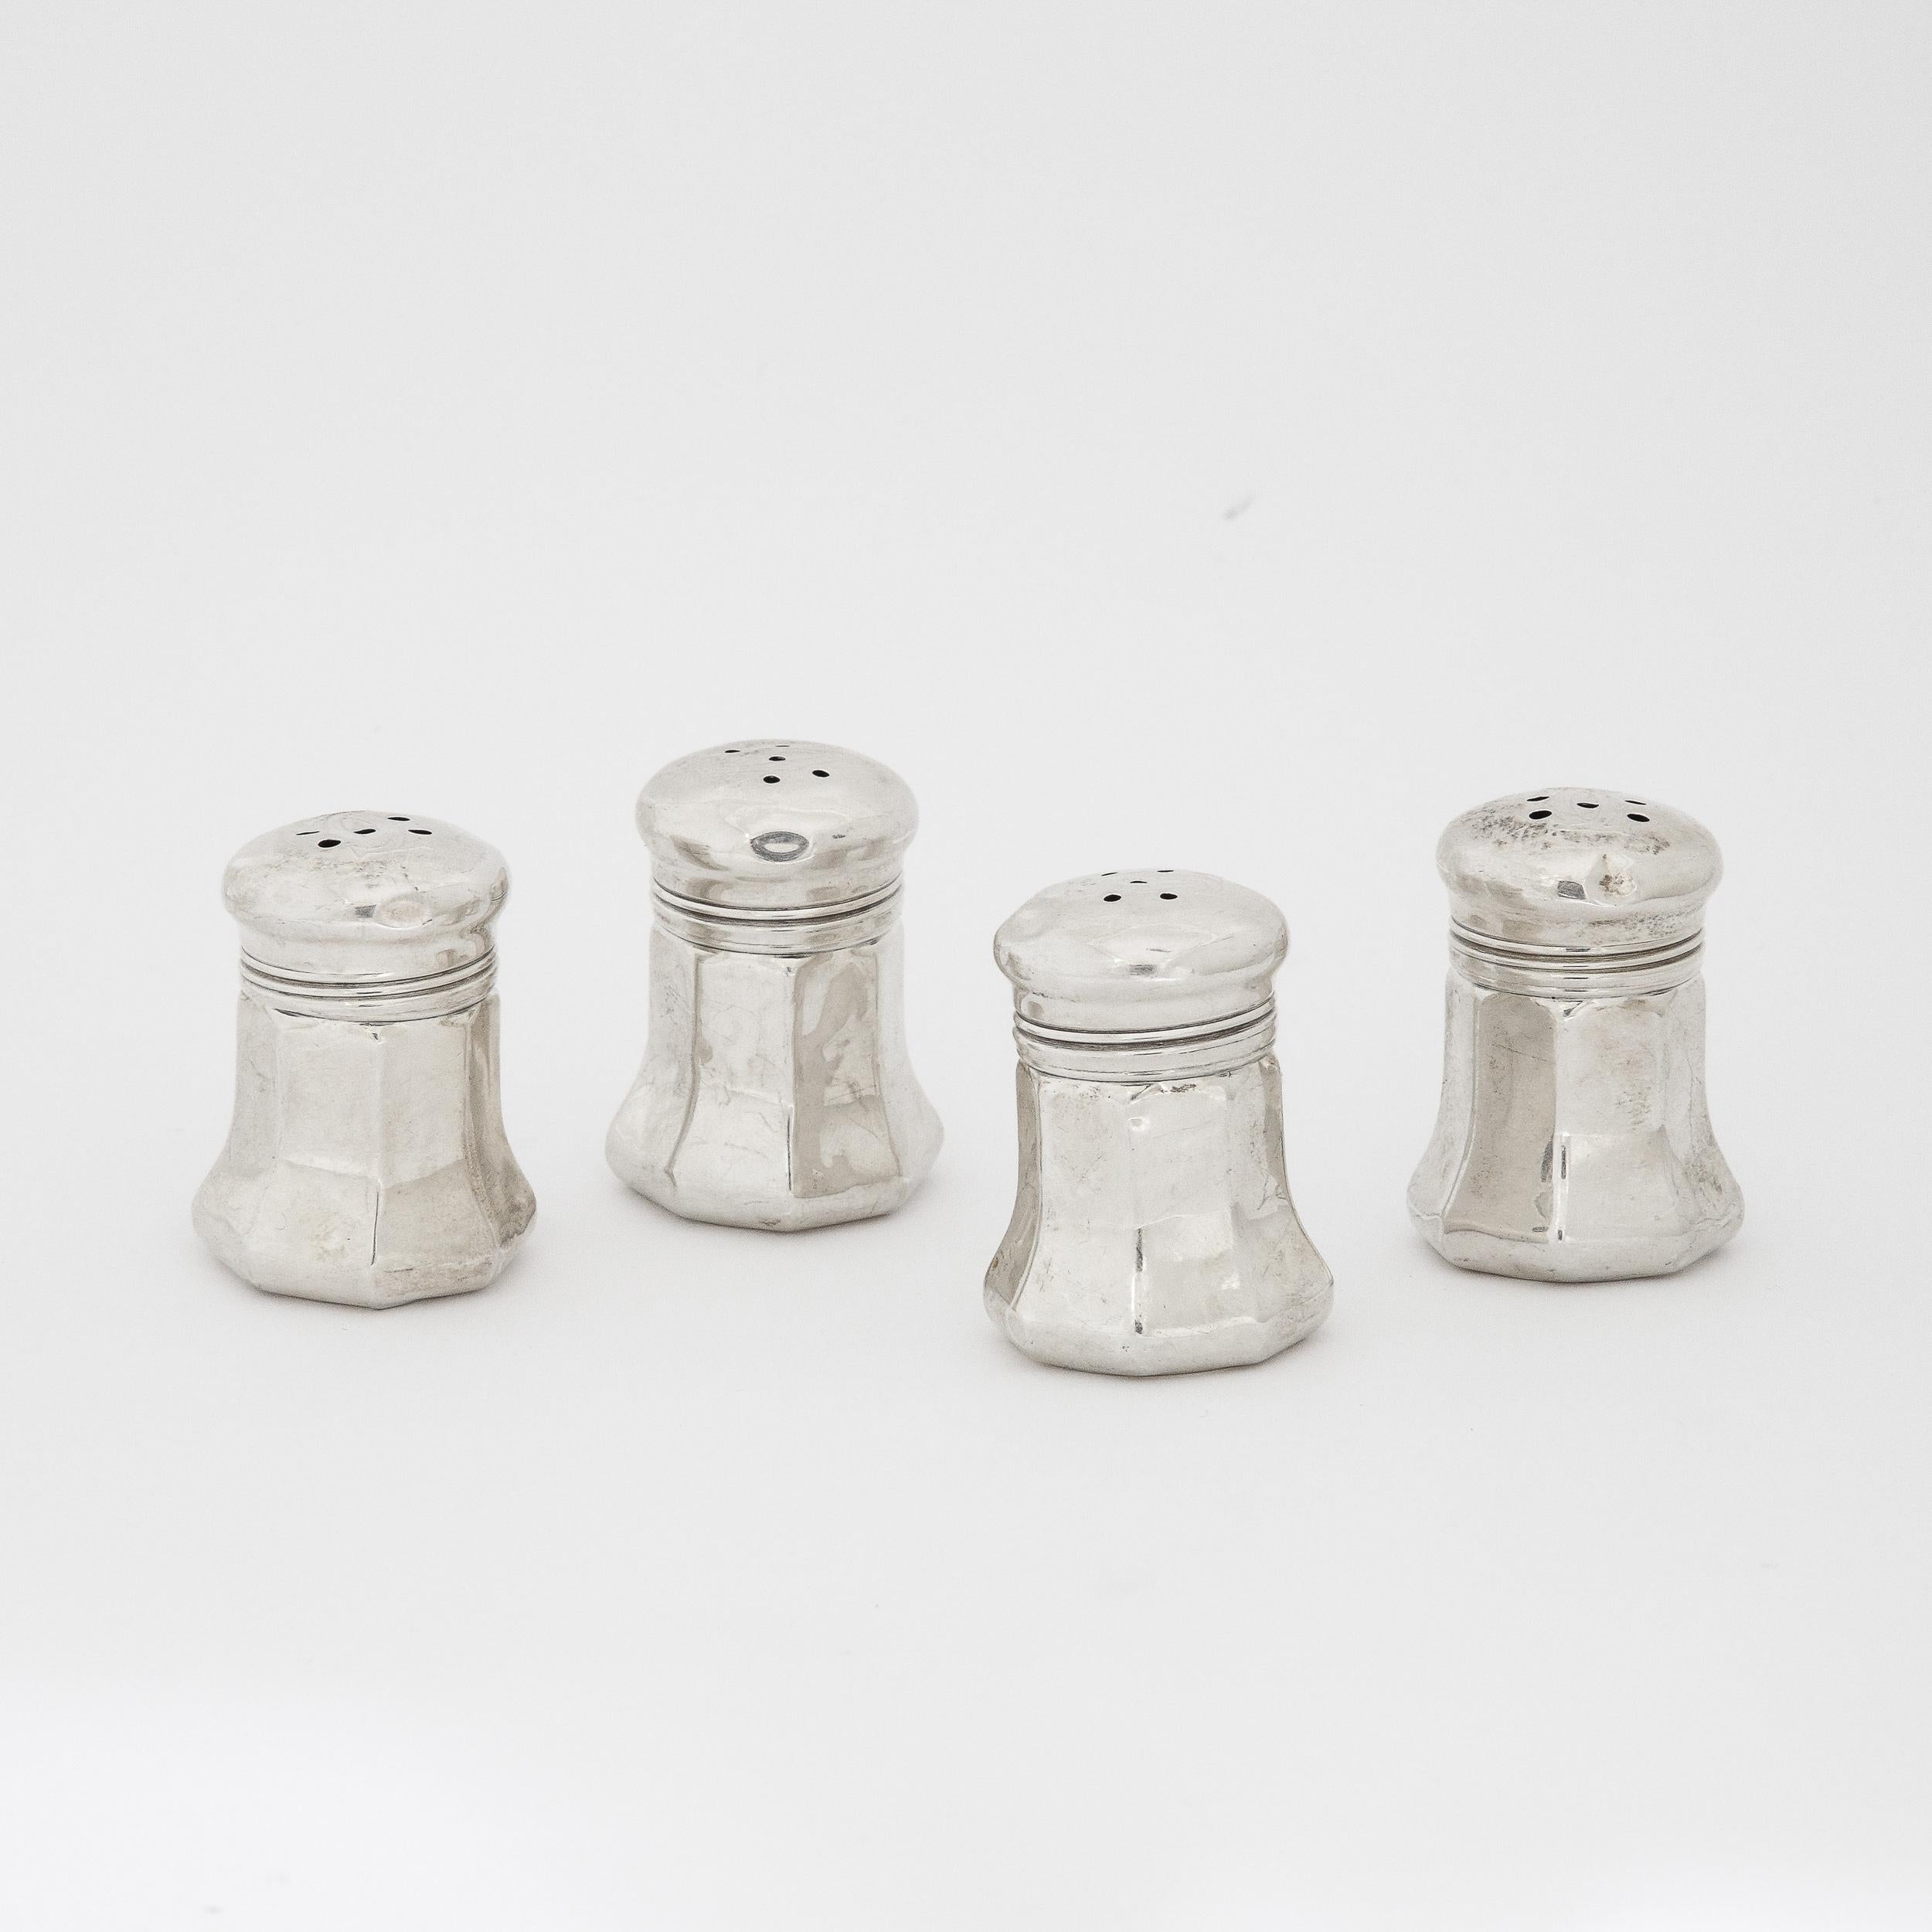 These charming Cartier Sterling Silver Salt Shakers originate from France during the 20th Century. Beautifully formed in sterling silver with signatures on the undersurface and the classic Cartier motif detailed on the top along with pierced